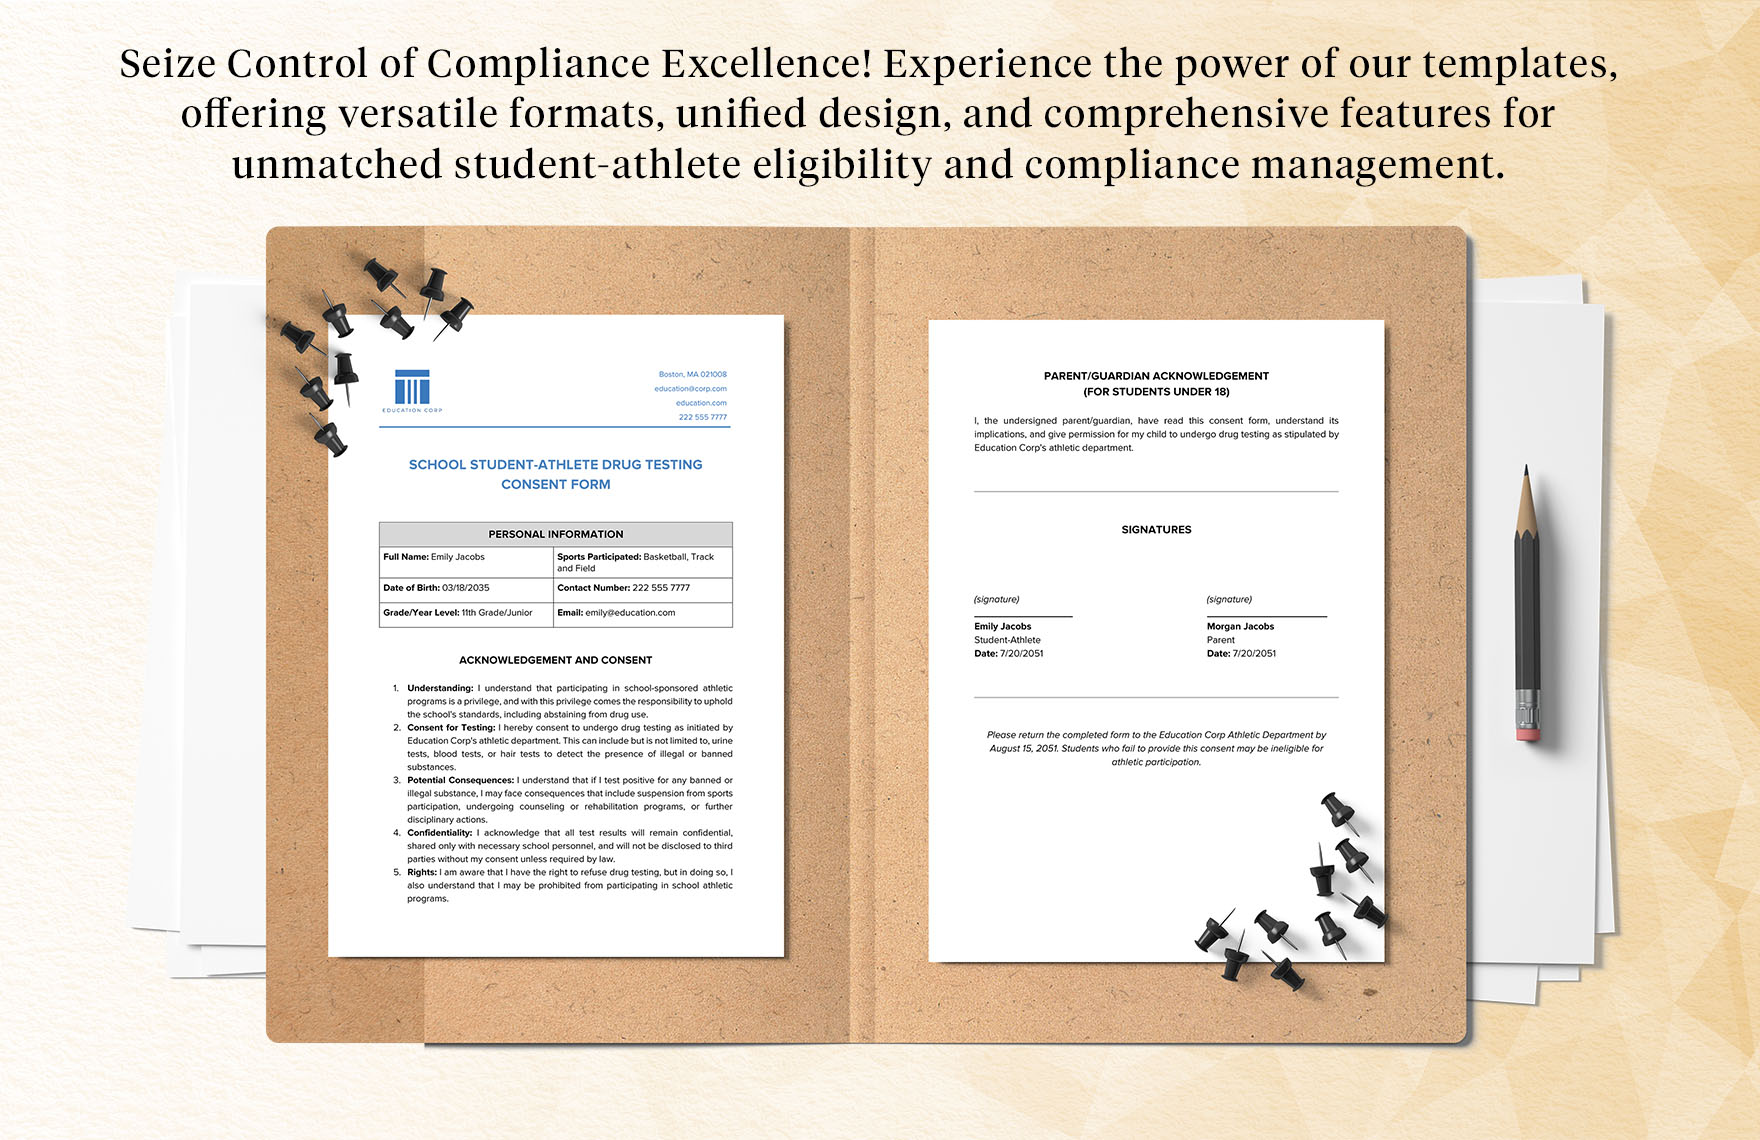 School Student-Athlete Drug Testing Consent Form Template